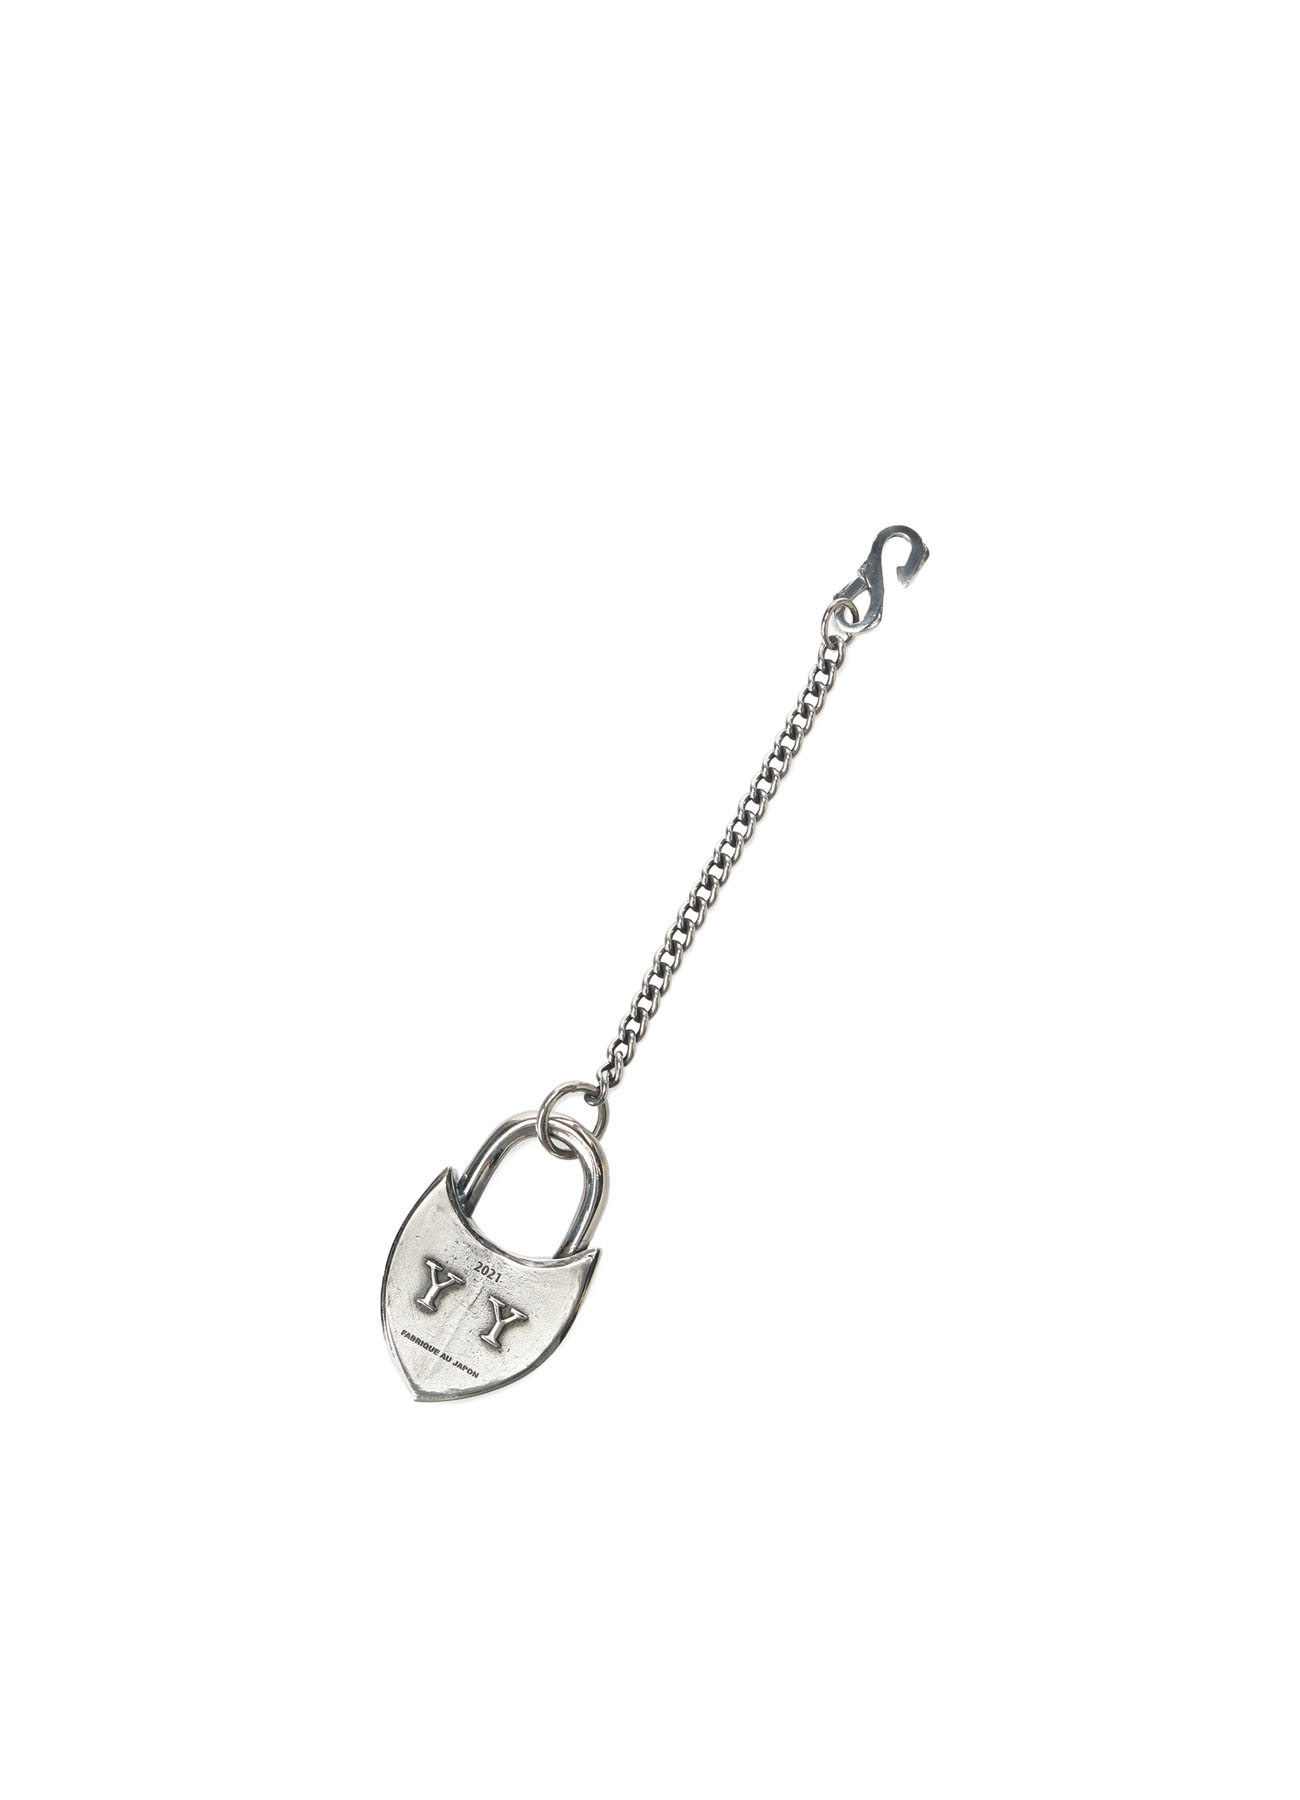 STERLING SILVER PADLOCK CHARM A